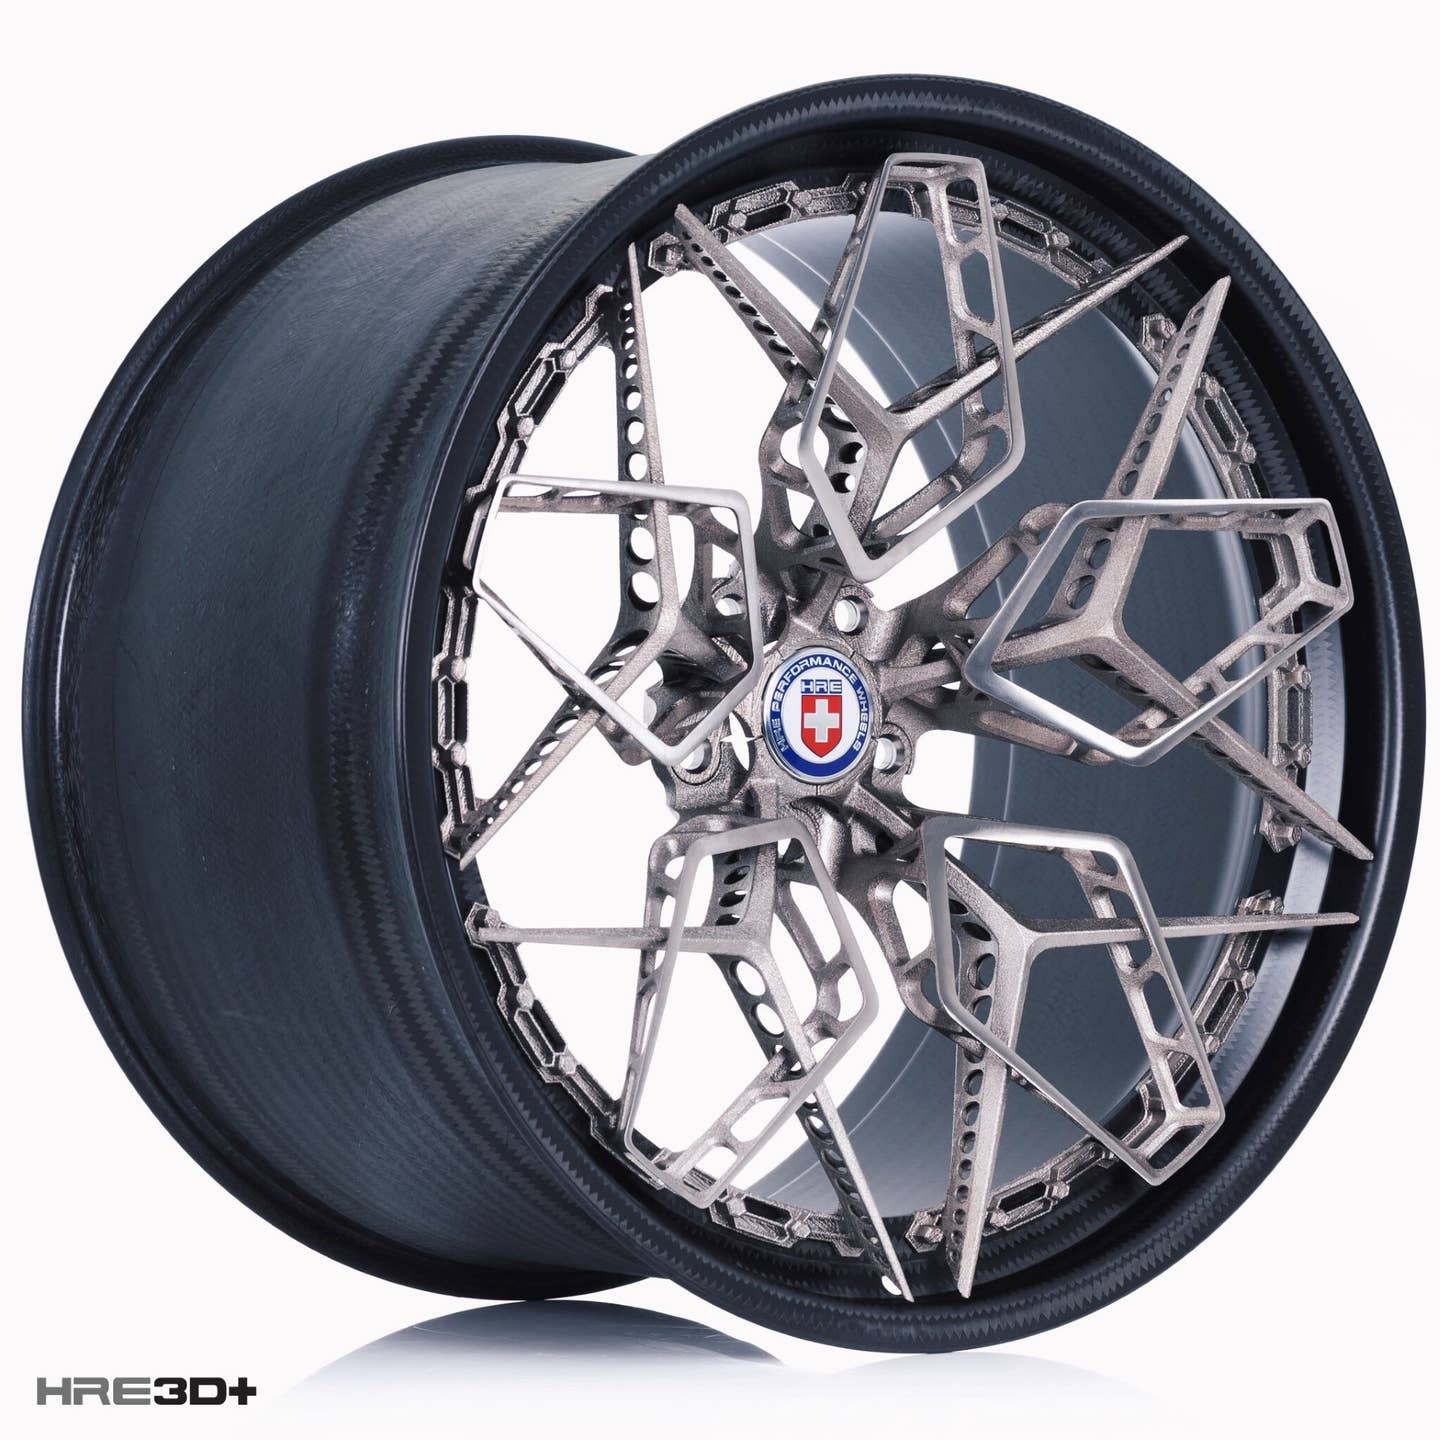 HRE's titanium wheel, which uses carbon fiber as the tub and 3D printing for the spokes.